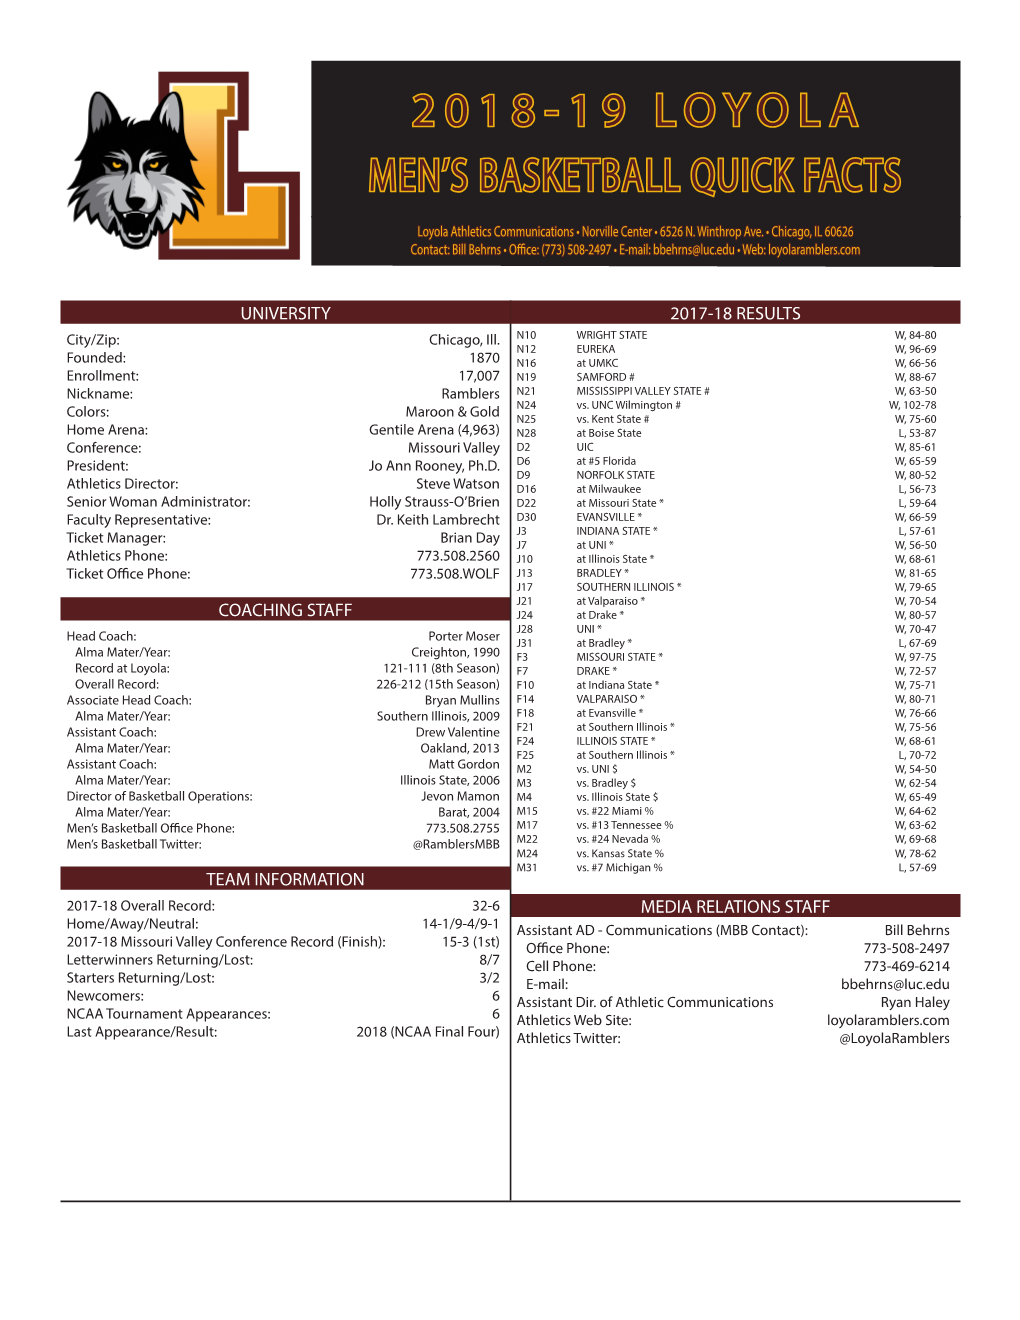 2018-19 Loyola Men's Basketball Quick Facts